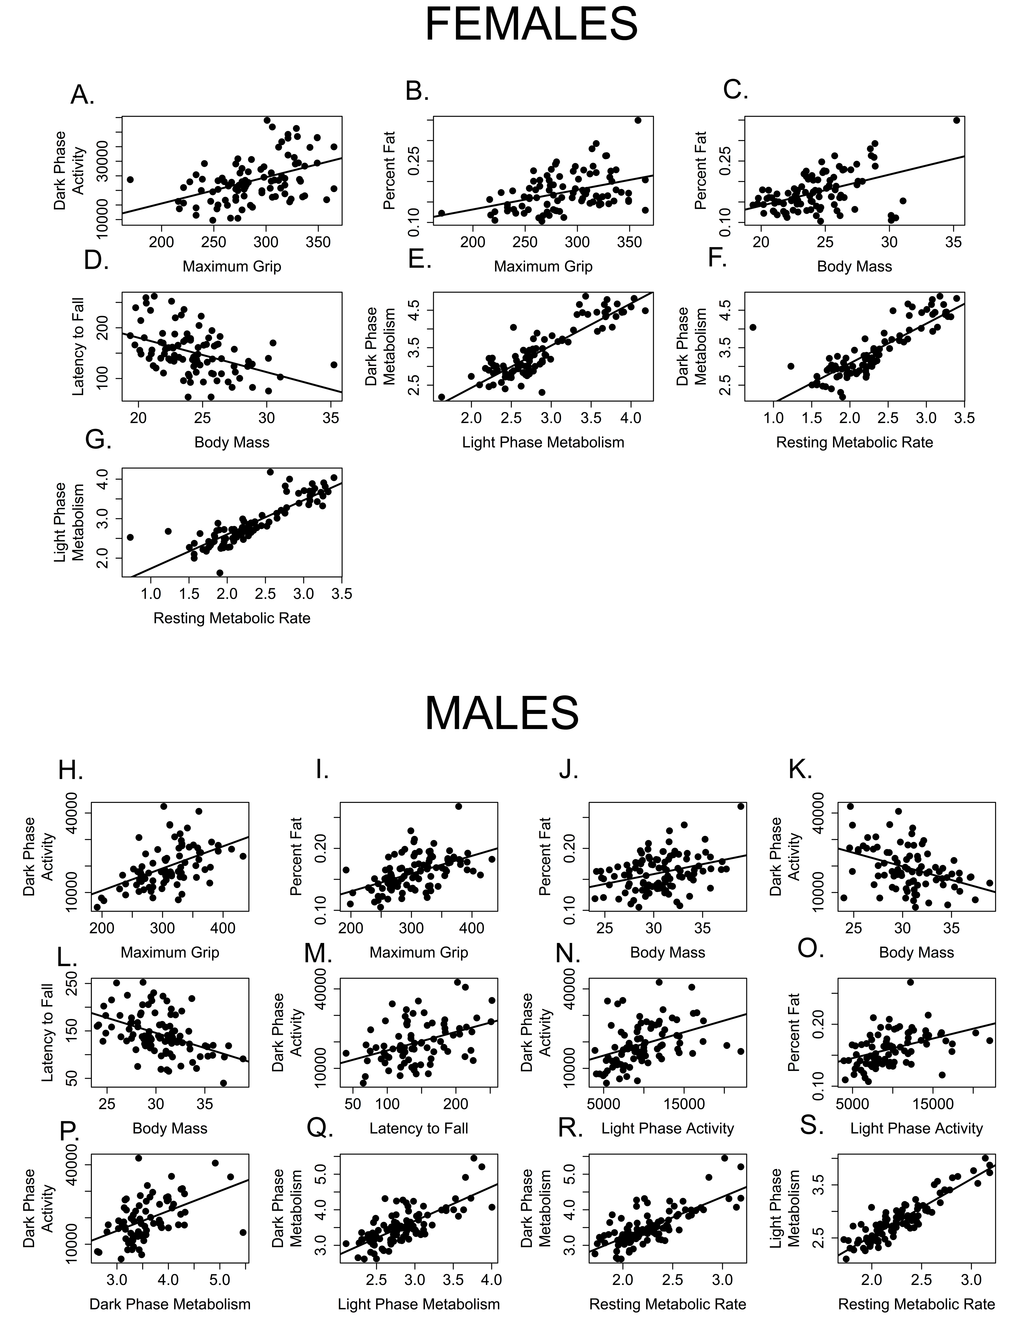 Few measures of healthspan are correlated with one another. Measures correlated among female mice include (A) grip strength and dark activity (p = 0.0003, R = 0.454); (B) grip strength and percent fat (p = 0.0037, R = 0.405); (C) percent fat and body mass, (D) rotarod performance (latency to fall) and body mass (p = 0.0006, R = -0.443); (E) dark and light phase metabolic rate (p F) dark phase and resting metabolic rate (p G) light phase and resting metabolic rate (p H) grip strength and dark activity (p = 0.0003, R = 0.454); (I) grip strength and percent fat (p = 0.0037, R = 0.405); J. percent fat and body mass; (K) dark phase activity and body mass; (L) rotarod performance (latency to fall) and body mass (p = 0.0006, R = -0.443); (M) rotarod performance and dark phase activity; (N) dark and light phase activity; (O) percent fat and light phase activity; (P) dark phase activity and metabolic rate; (Q). dark and light phase metabolic rate (p R) dark phase and resting metabolic rate (p S) light phase and resting metabolic rate (p 